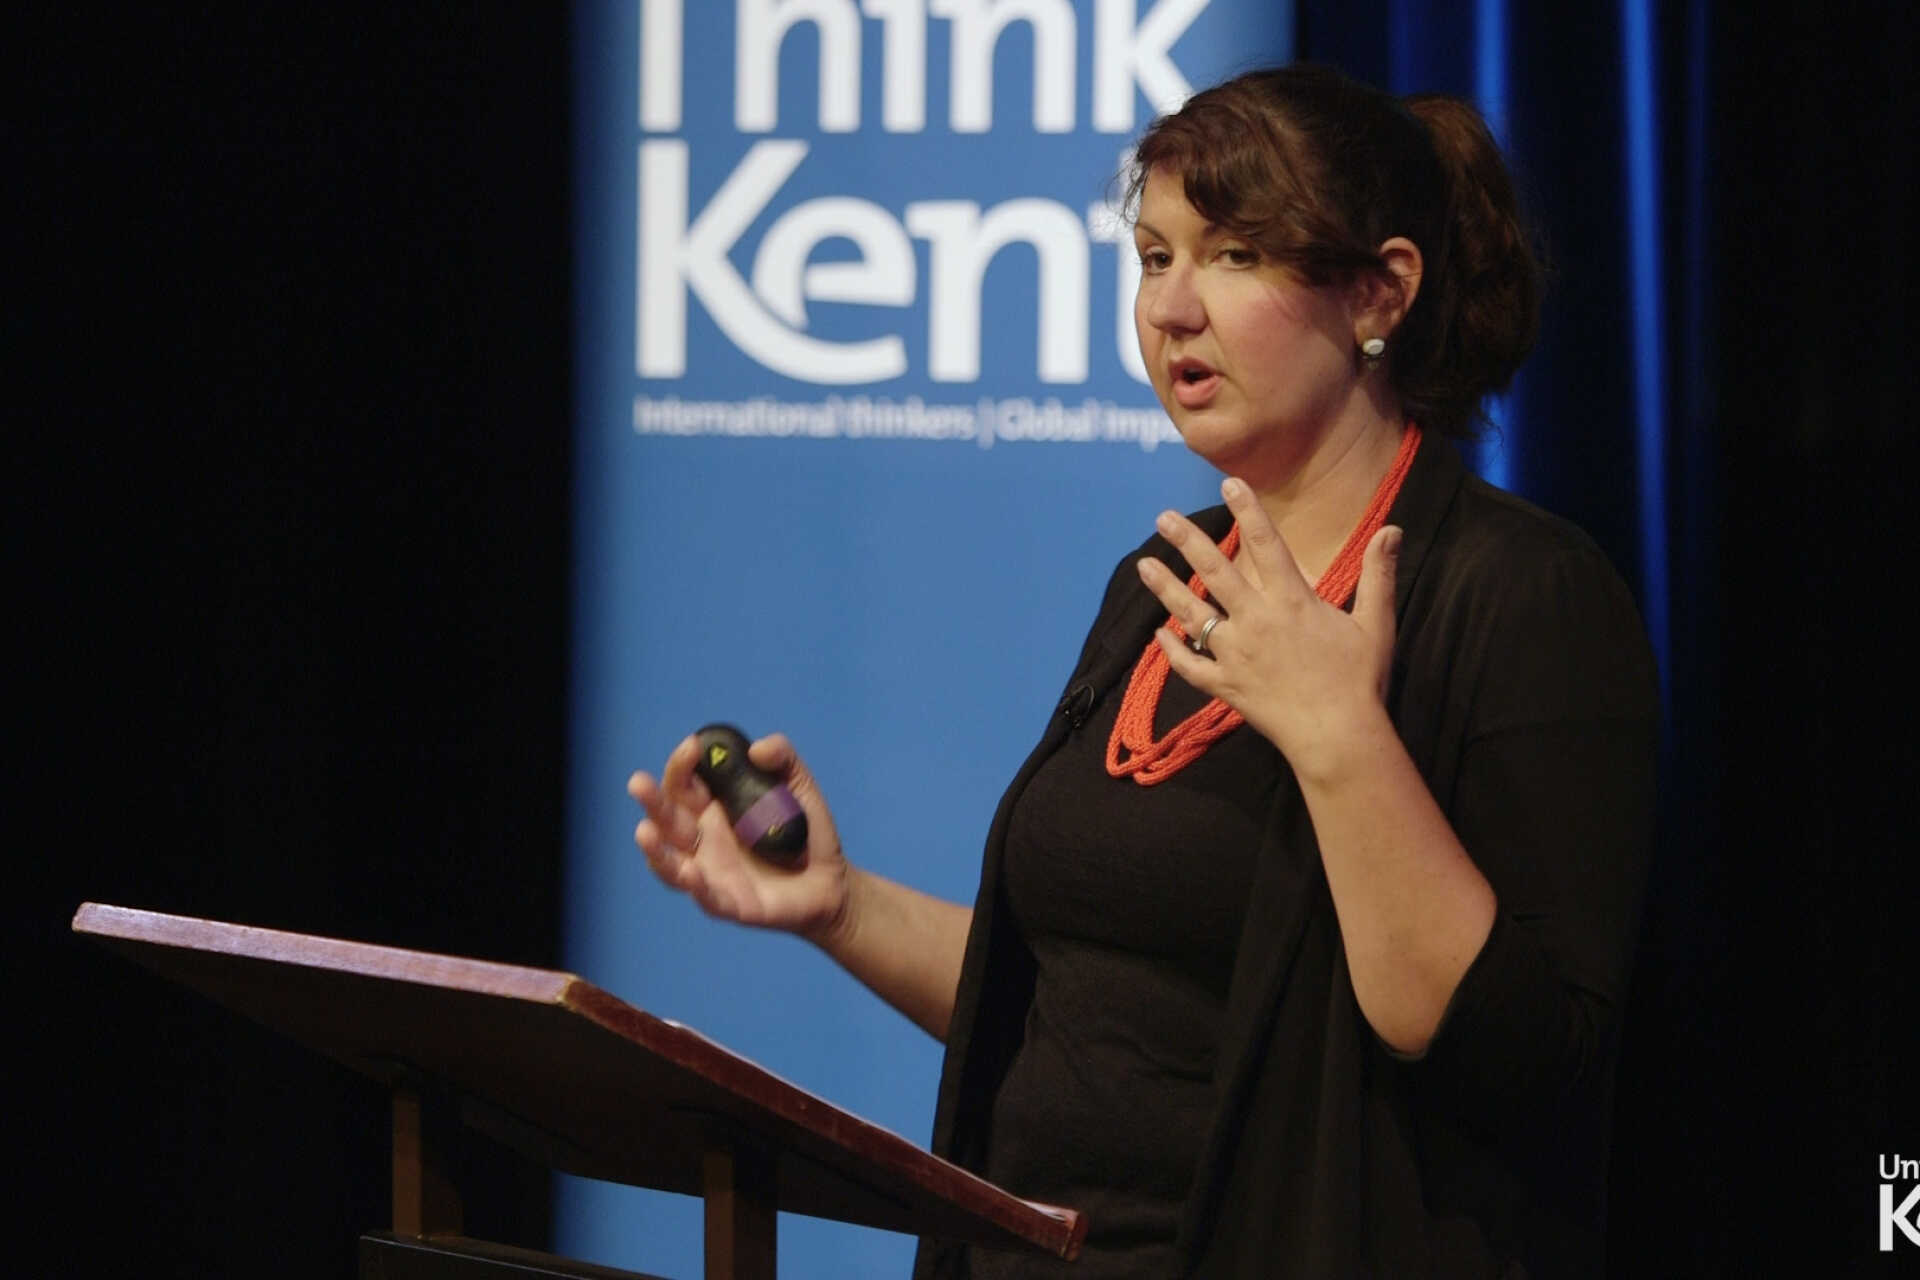 Lois Lee giving Think Kent lecture